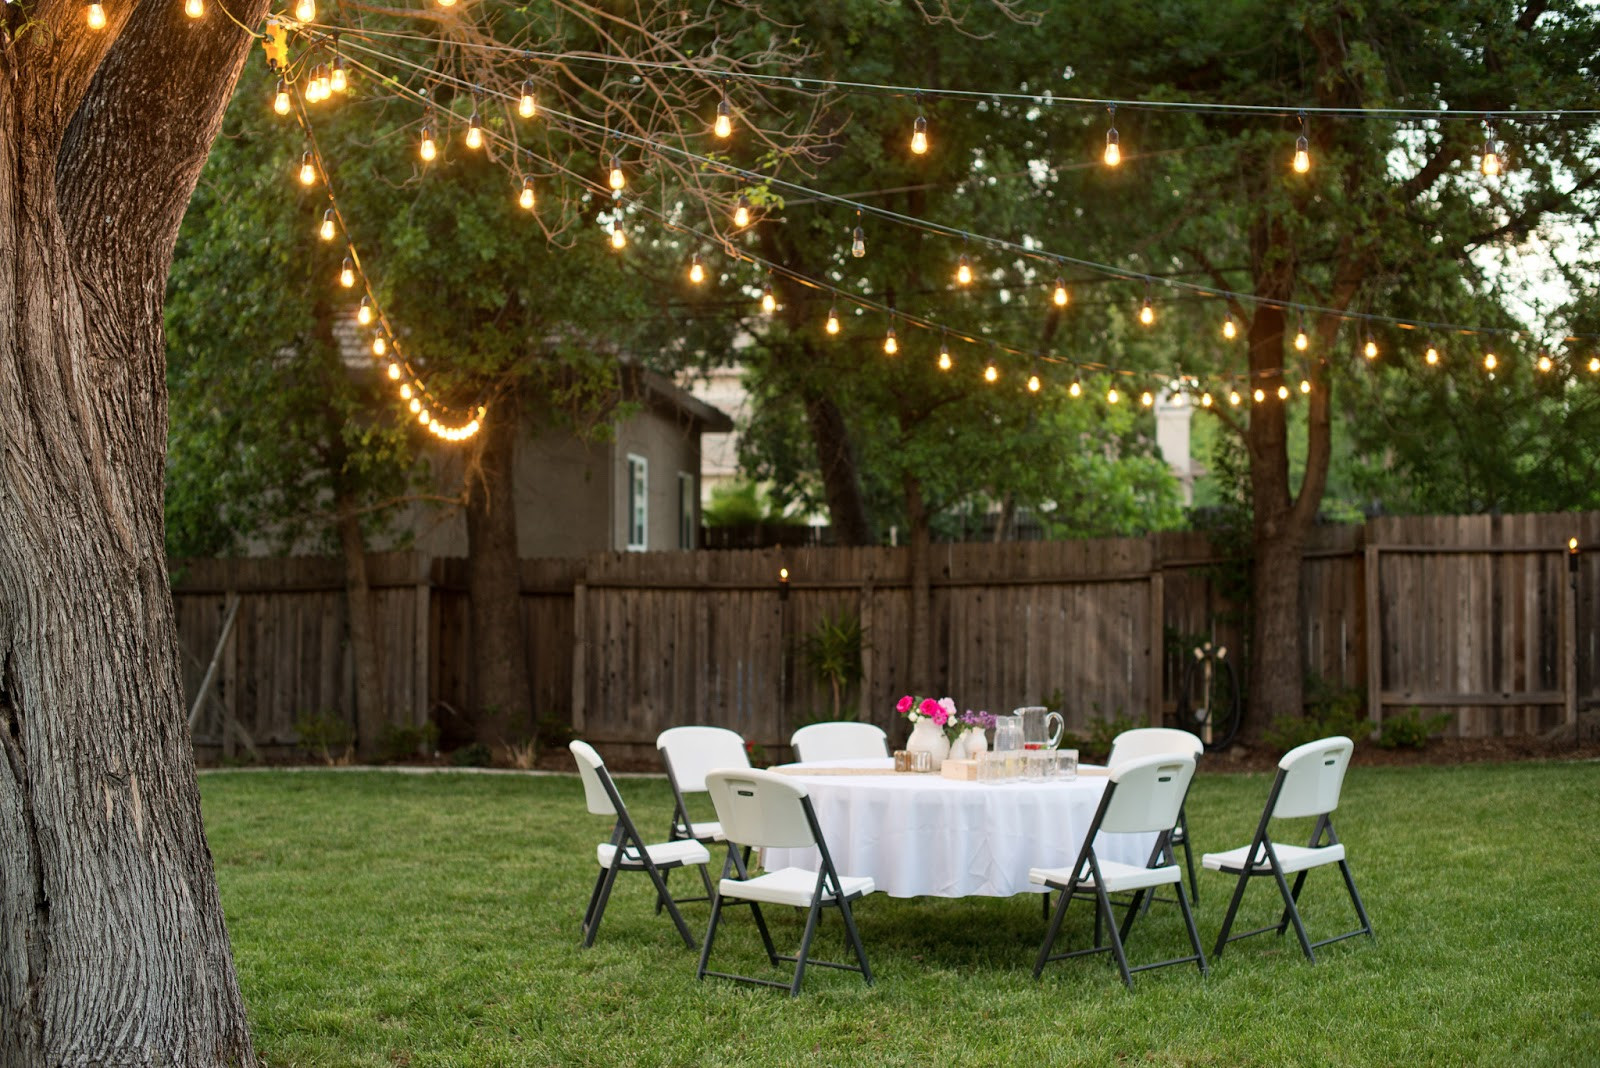 Backyard Lighting Ideas For A Party
 10 Quick Tips for DIY Outdoor Lighting